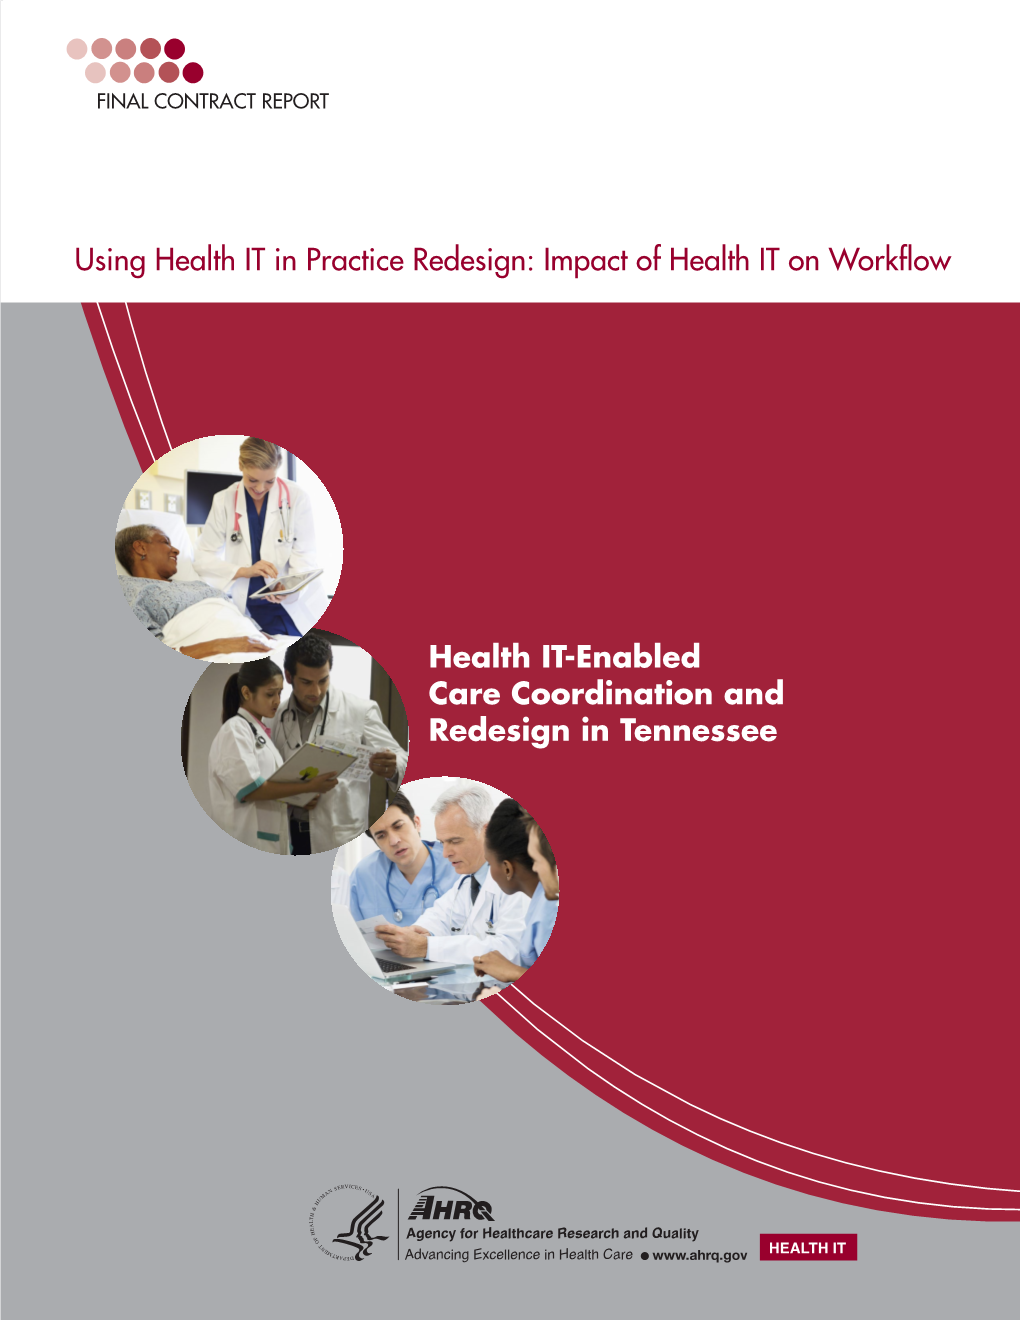 Health IT-Enabled Care Coordination and Redesign in Tennessee